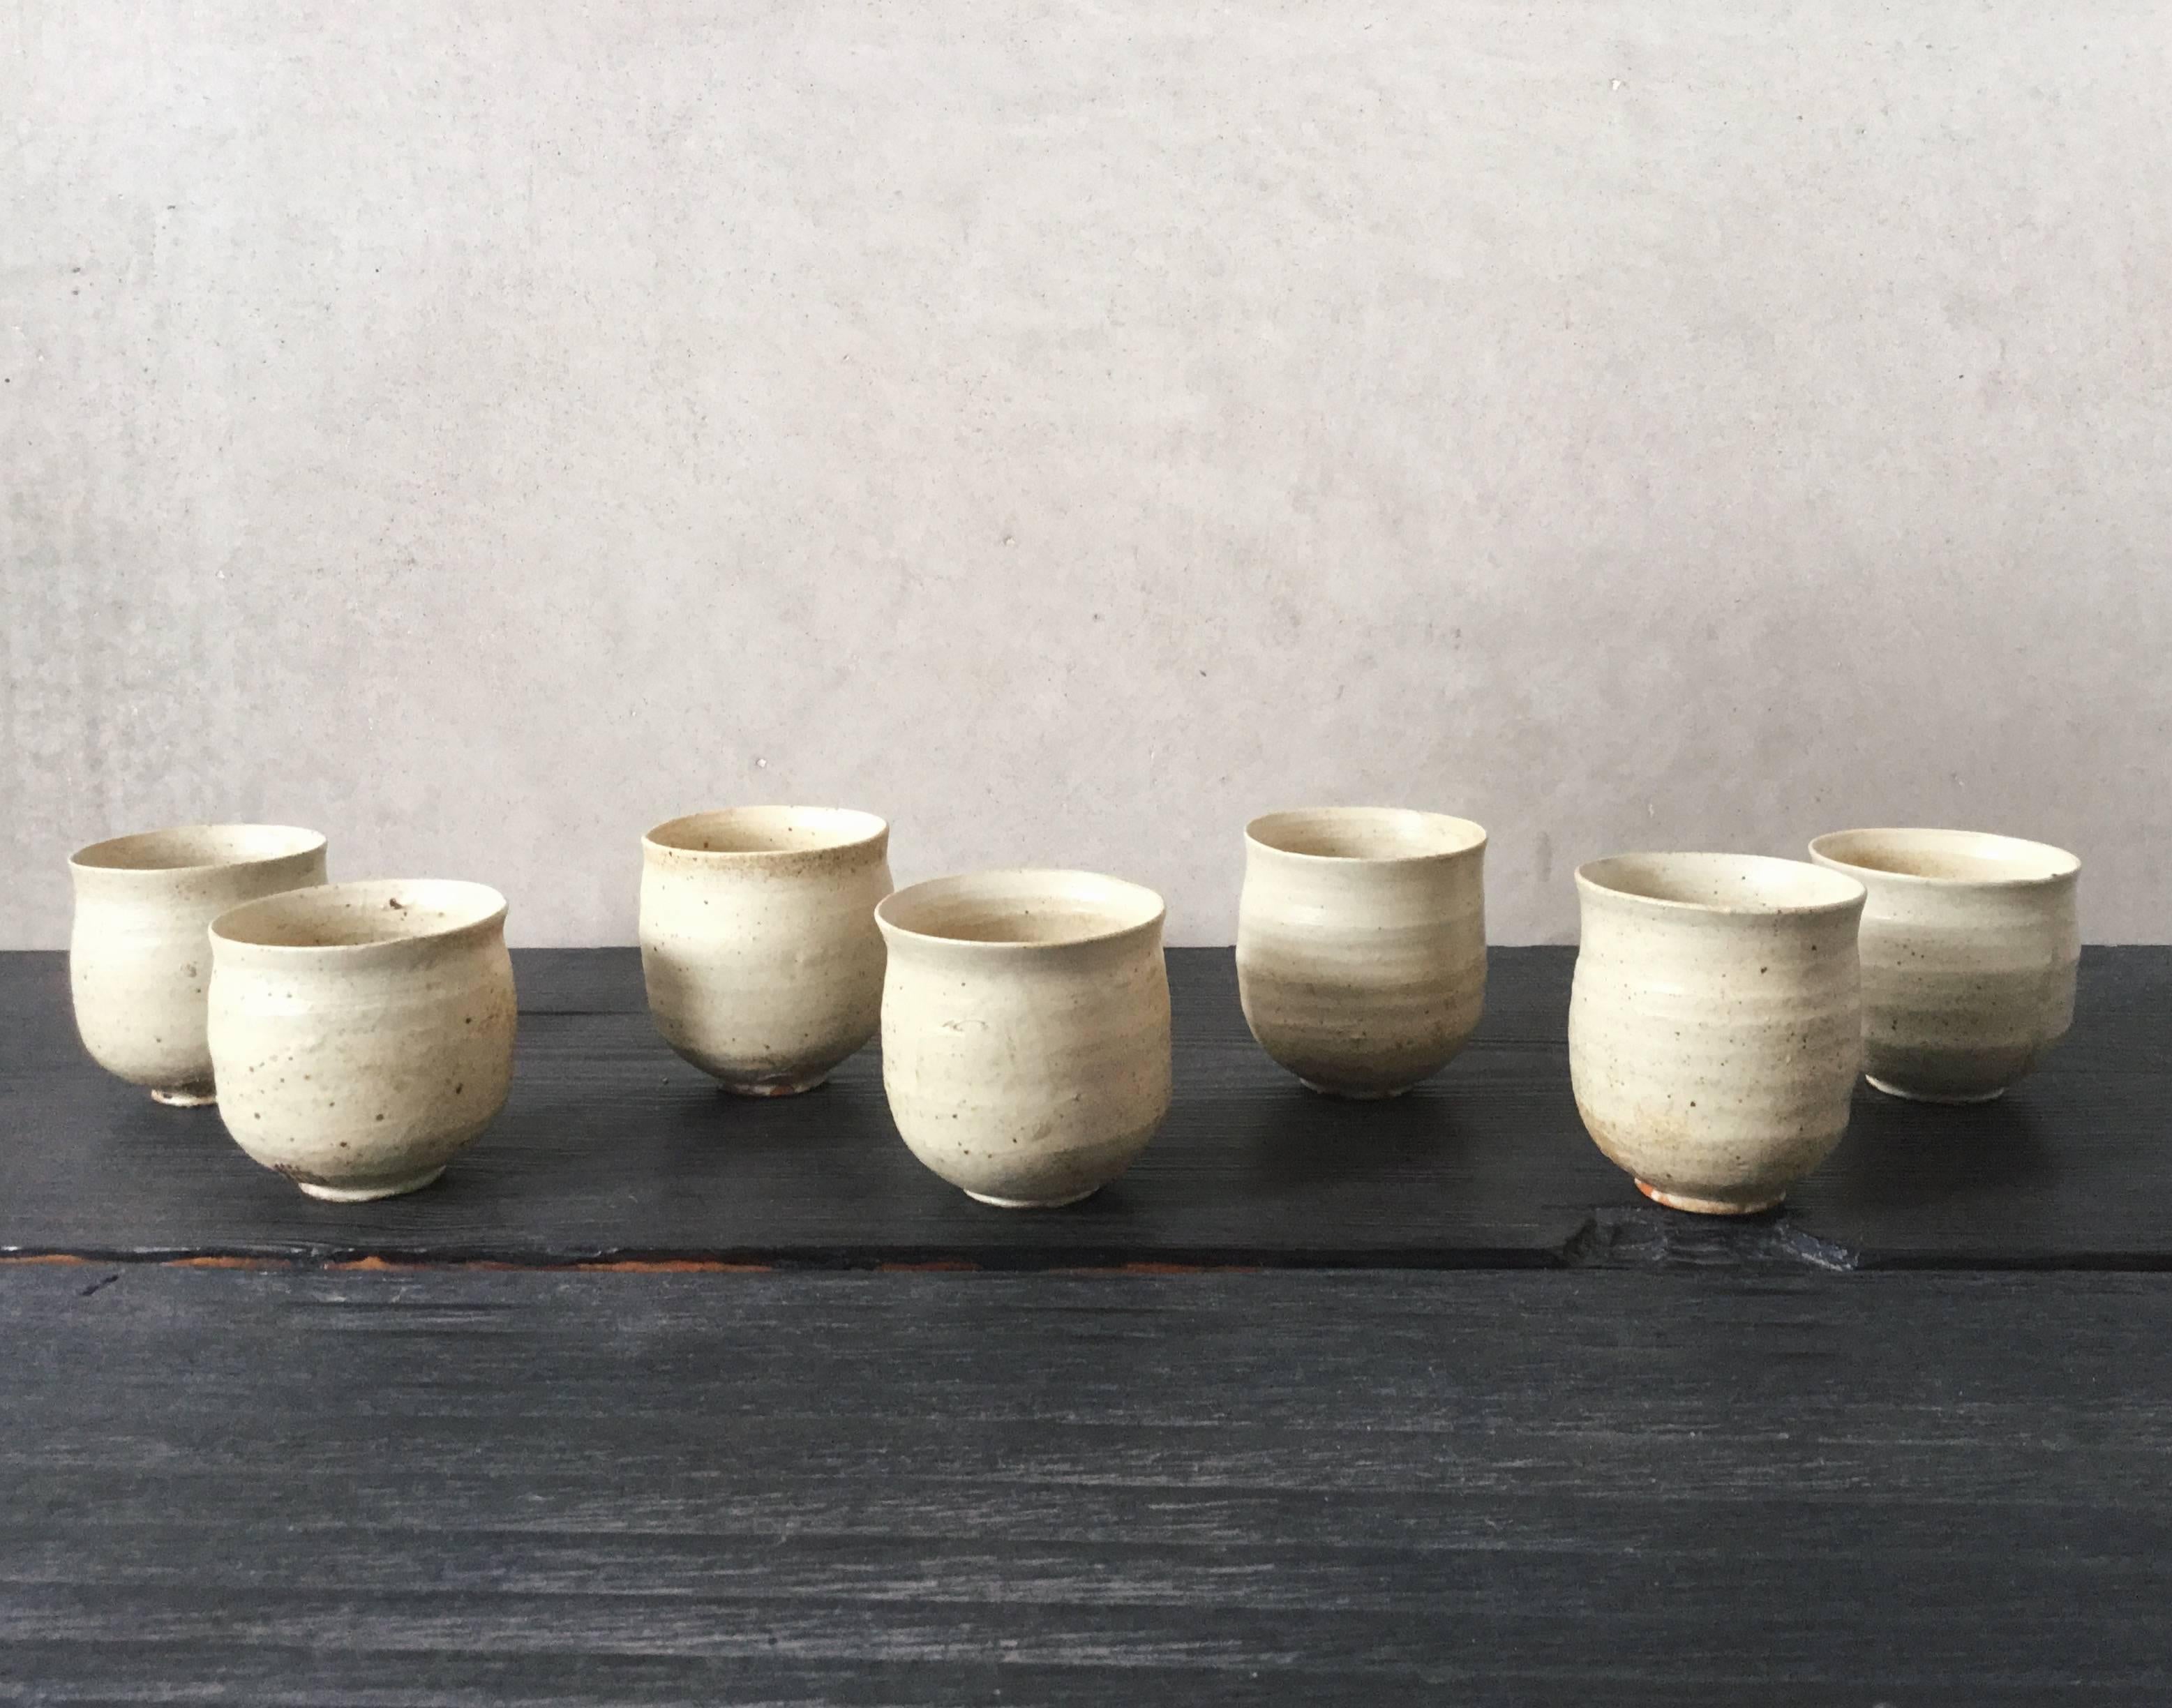 These Japanese ceramic tea cups are by Shiro Shimizu, from his famous Kyoto studio. 

The grandson of celebrated late ceramicist Mr. Uichi Shimizu, Shiro Shimizu hails from a lineage of pottery masters who dedicate themselves to the study and